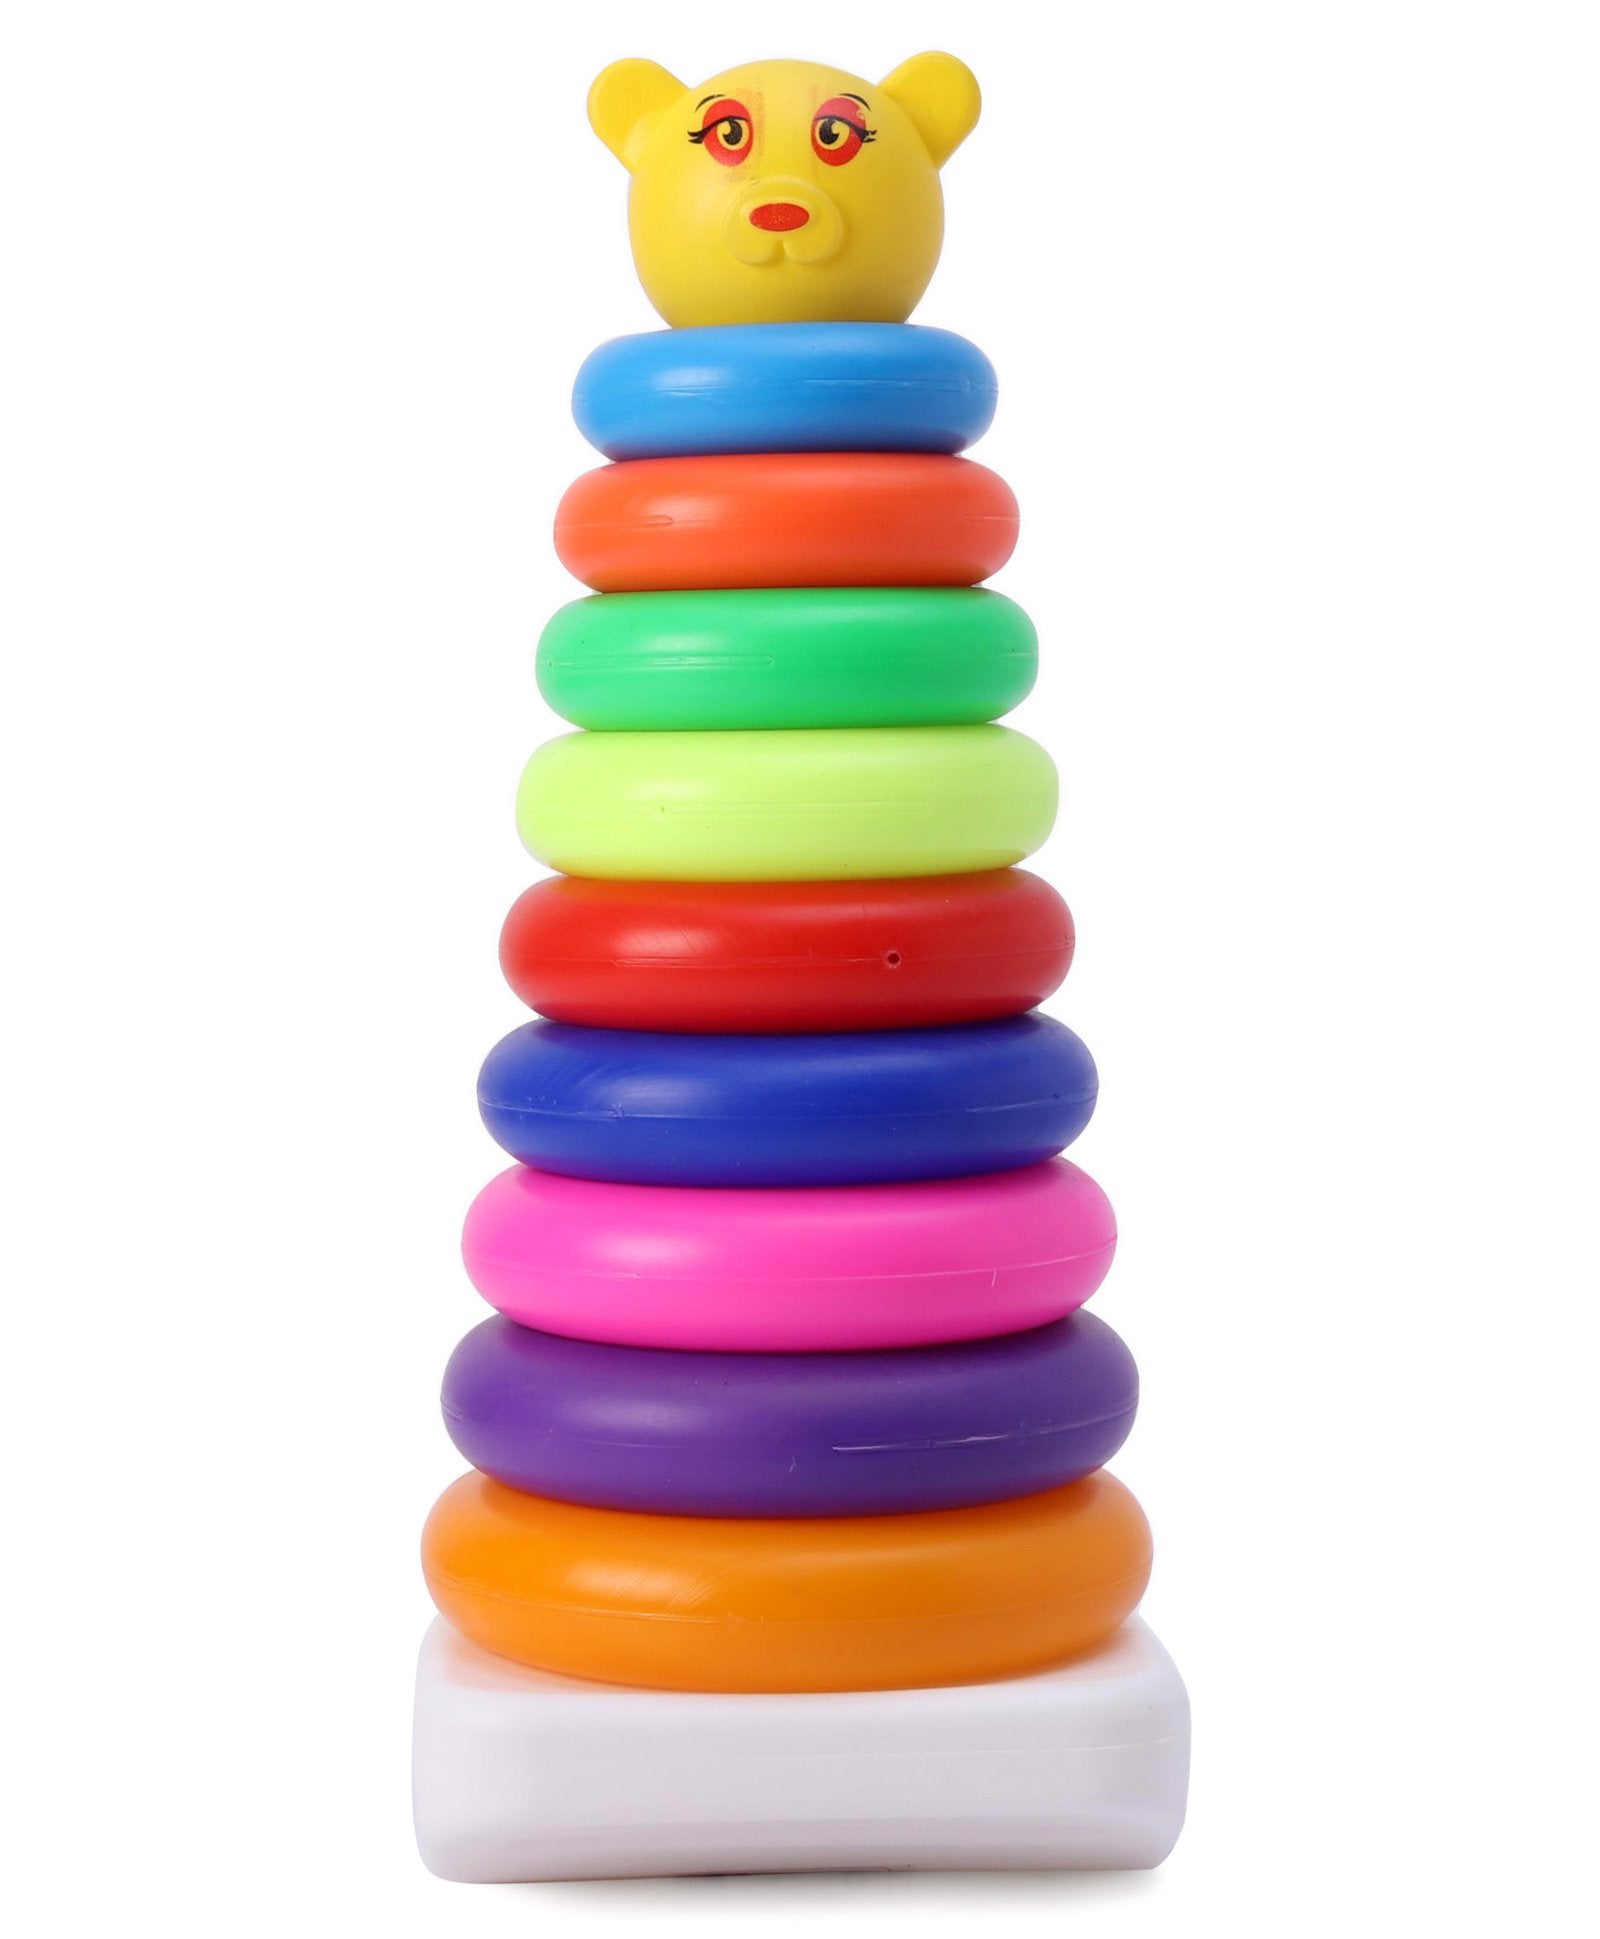 HighRoof® Junior Smiley Stacking Colorful 7 pcs Teddy Rings for Kids with  Play Set Toy, Brien Development Toy for Kids, Best Gift for Baby Boys and  Girls- Multi Color : Amazon.in: Toys